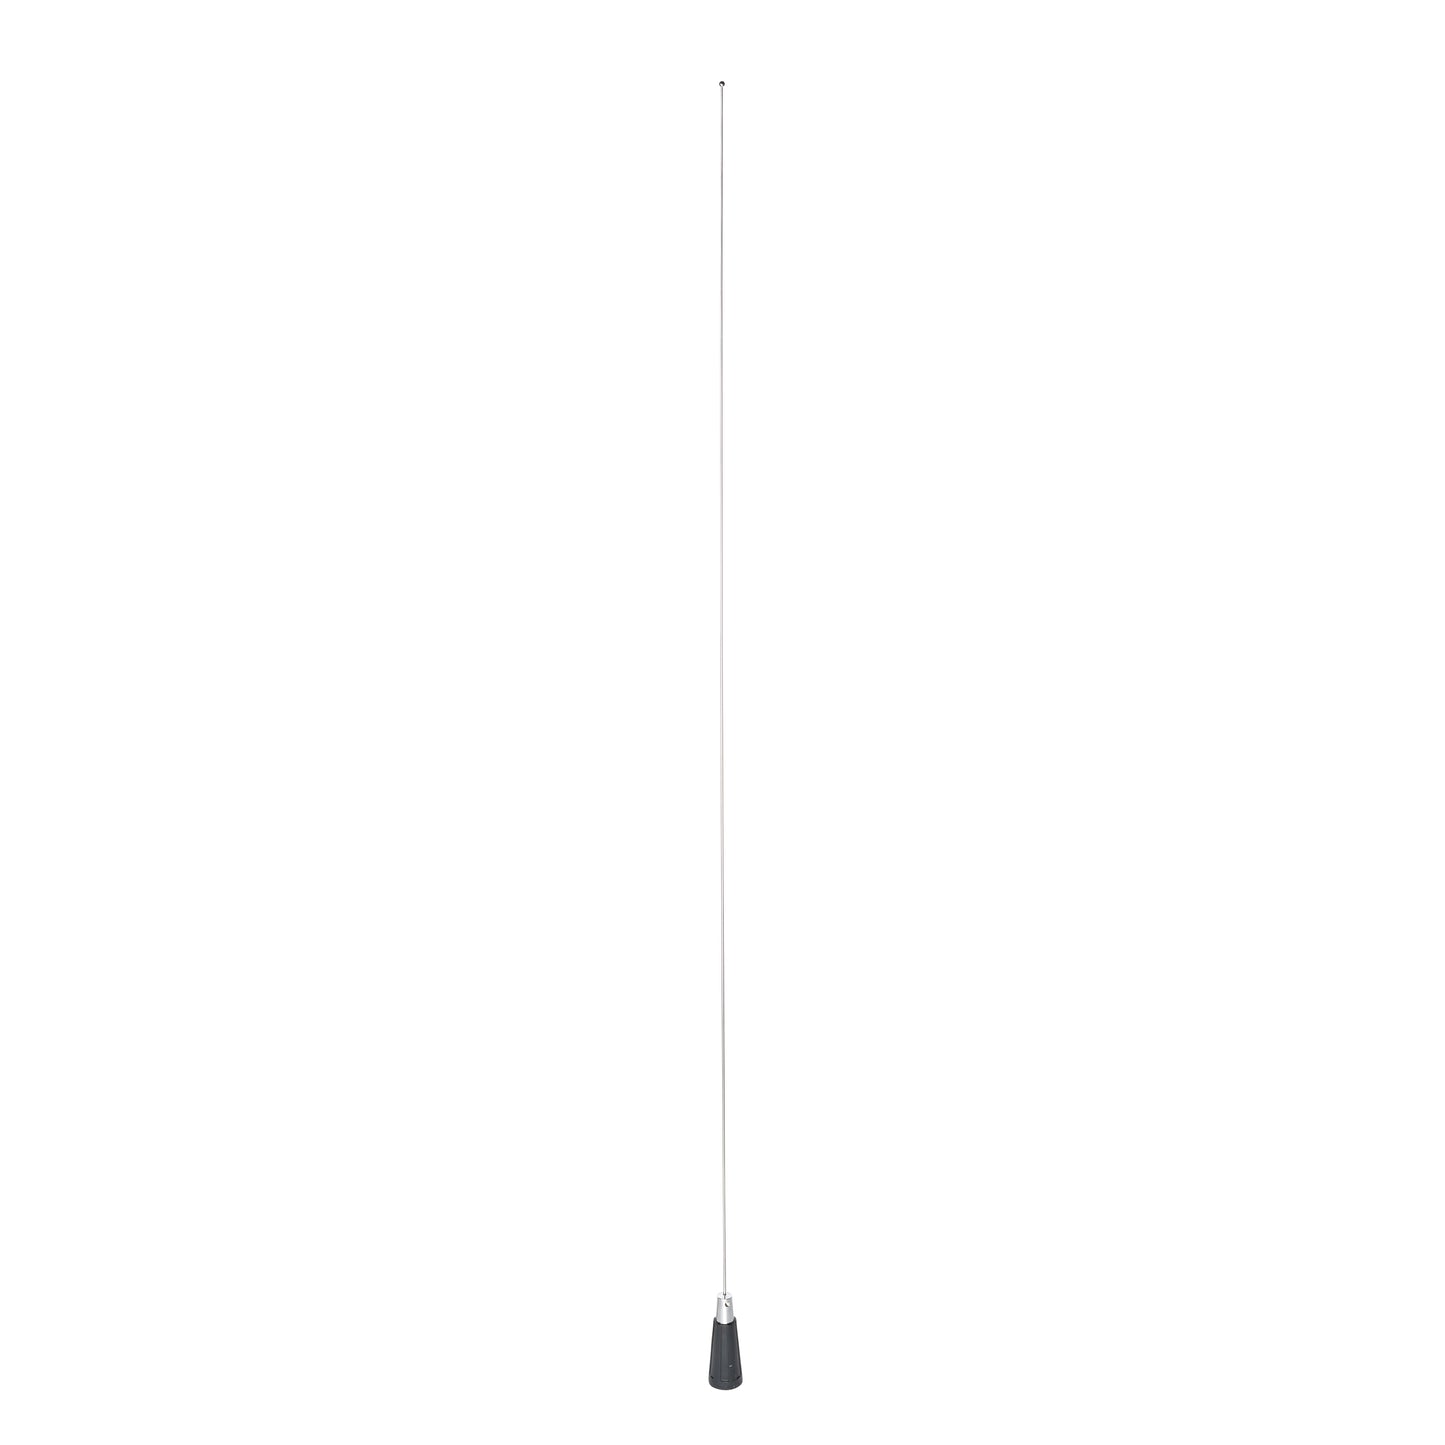 Motorola RAD4000 Antenna Only (less cable & install hardware) - Standard Duty, 136-174 MHz